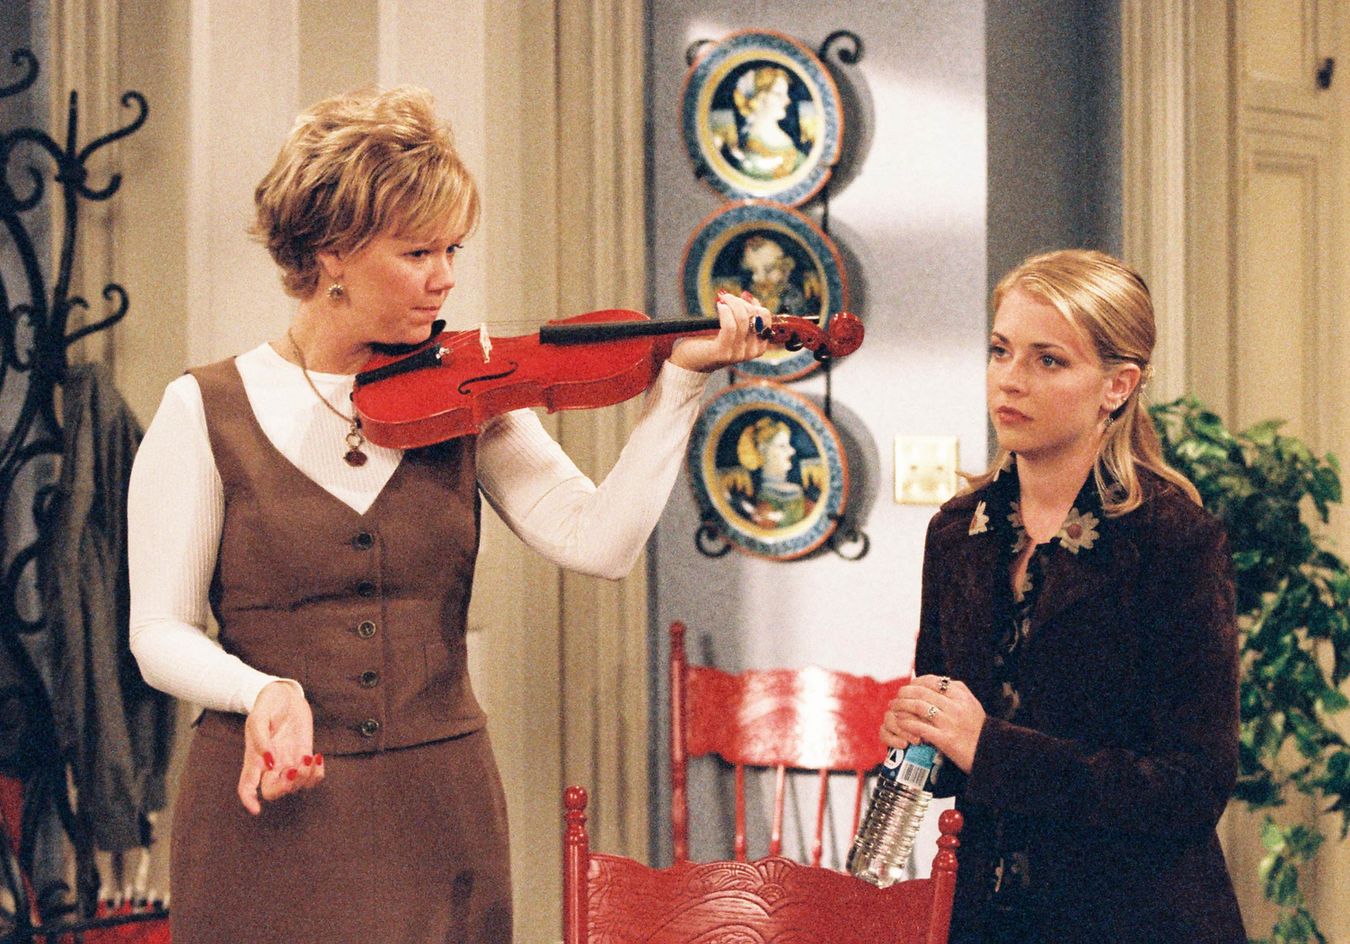 Hilda Spellman was played by Caroline Rhea, and she recently revealed how s...